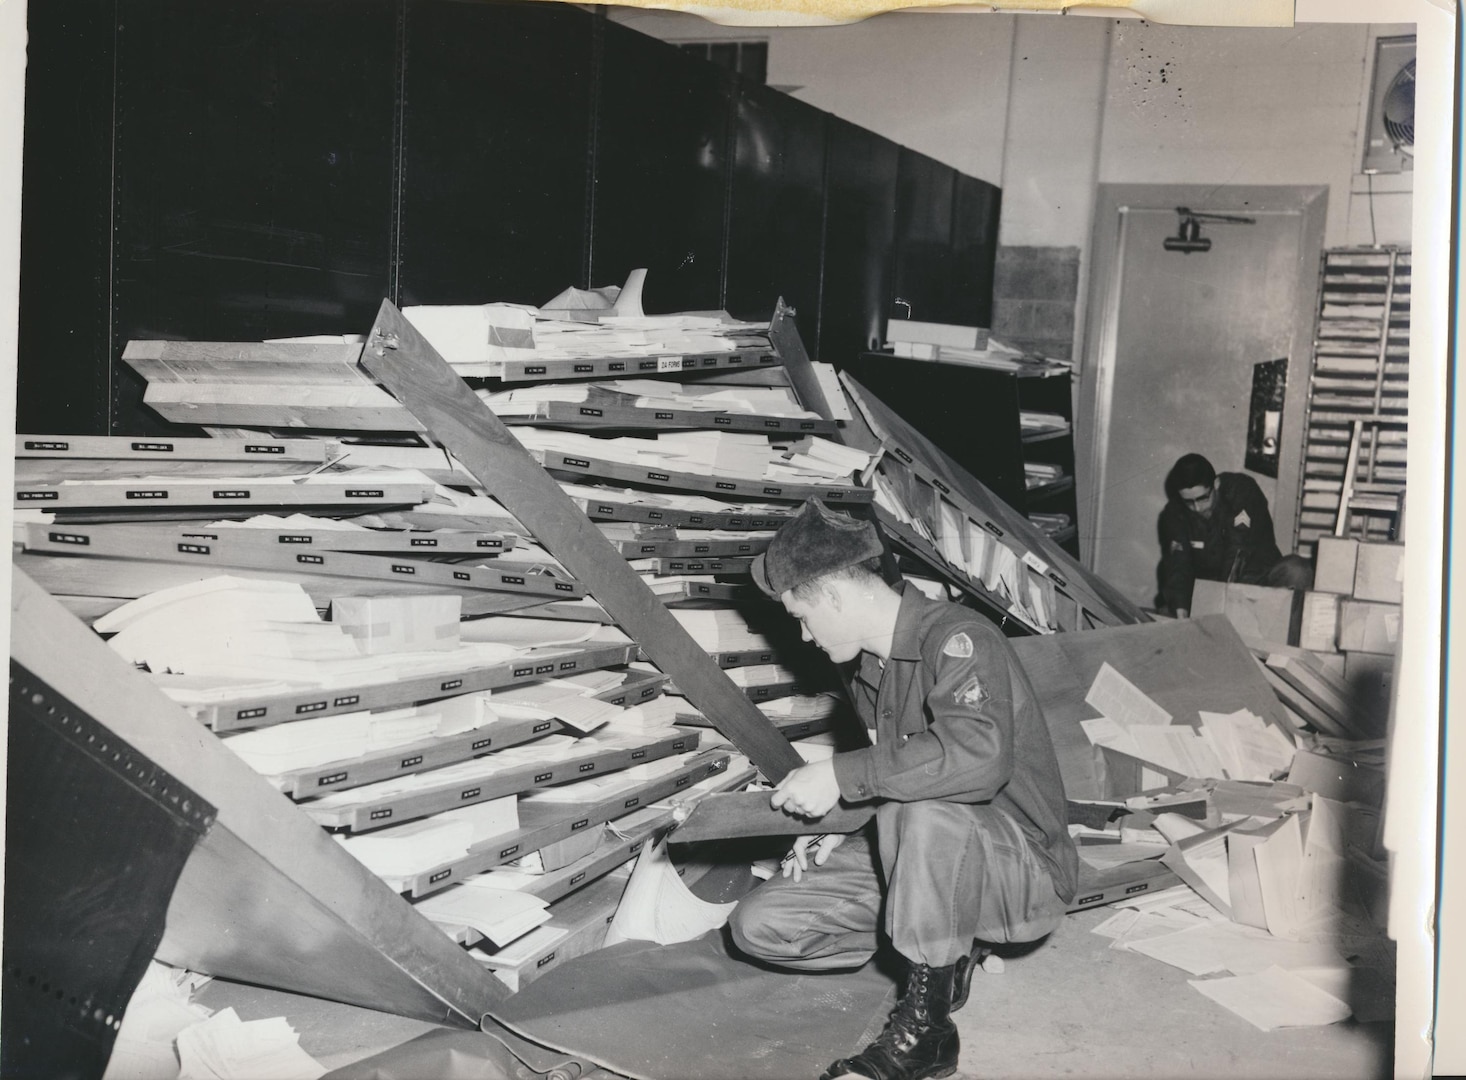 The large earthquake damaged National Guard offices in Alaska as well as civilian homes and facilities. These Guard members start cleaning up their own building in  Anchorage. They had just arrived there for annual training when the quake hit March 27, 1964.